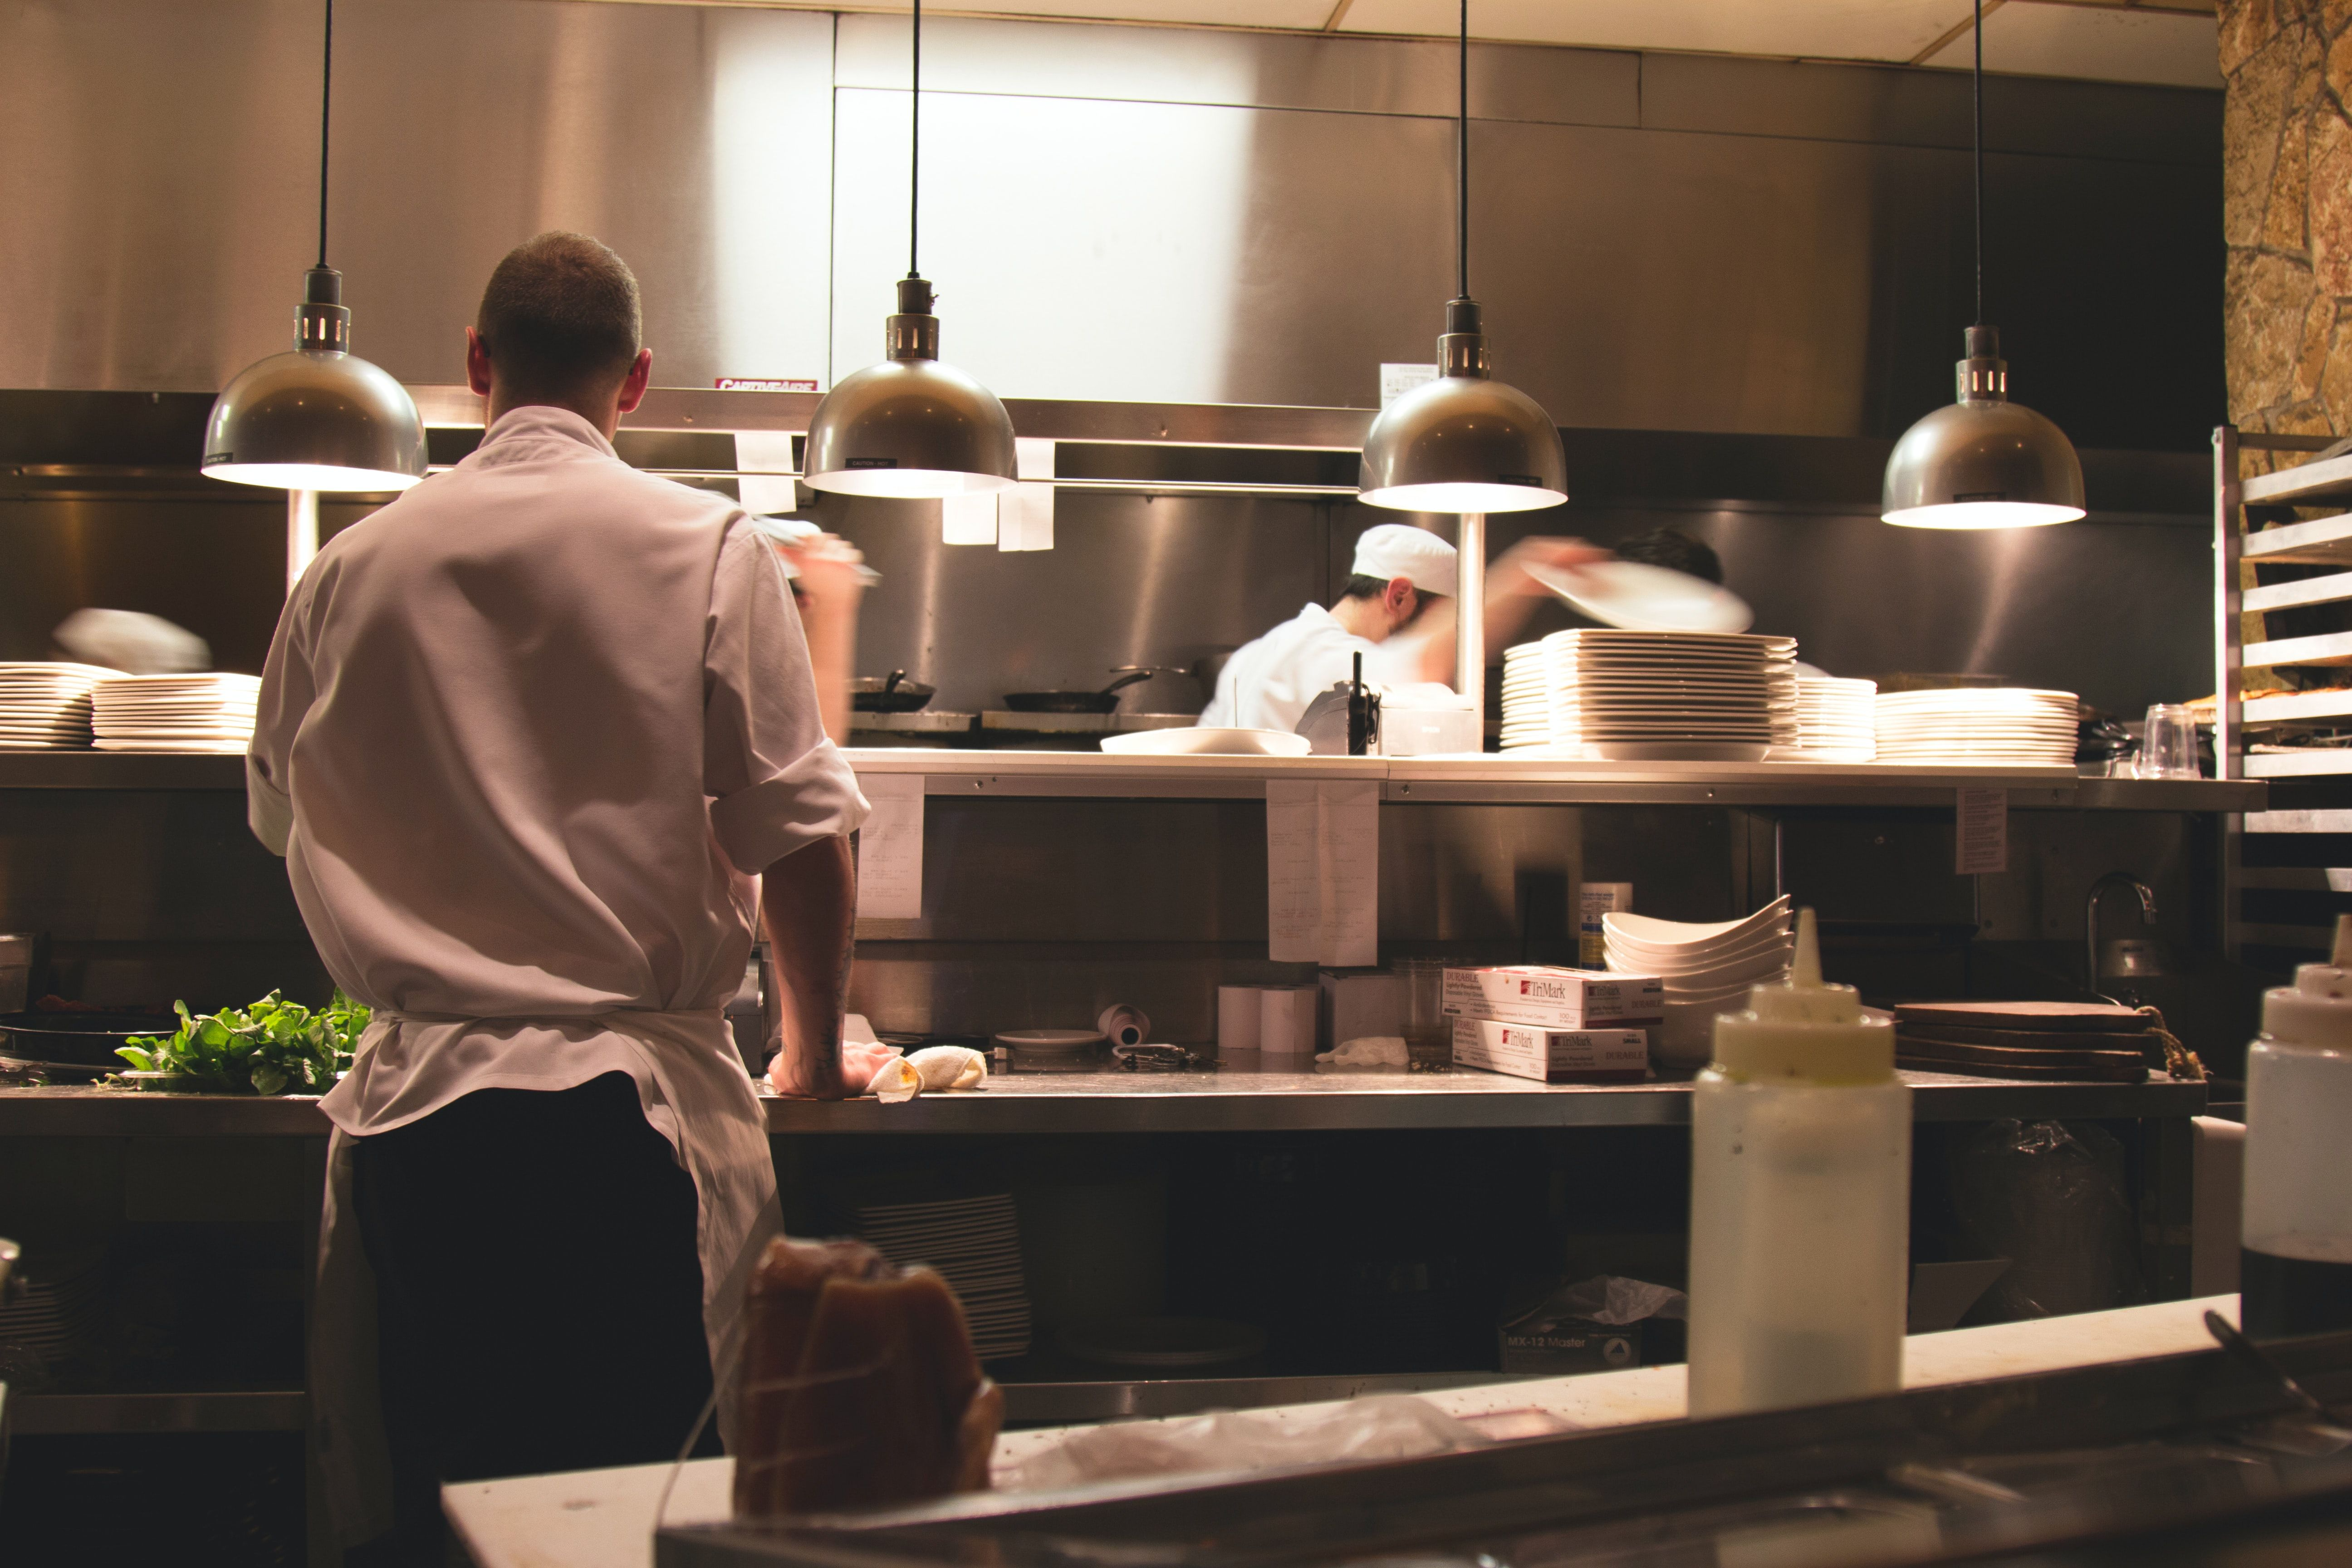 Grease management guide for food businesses published